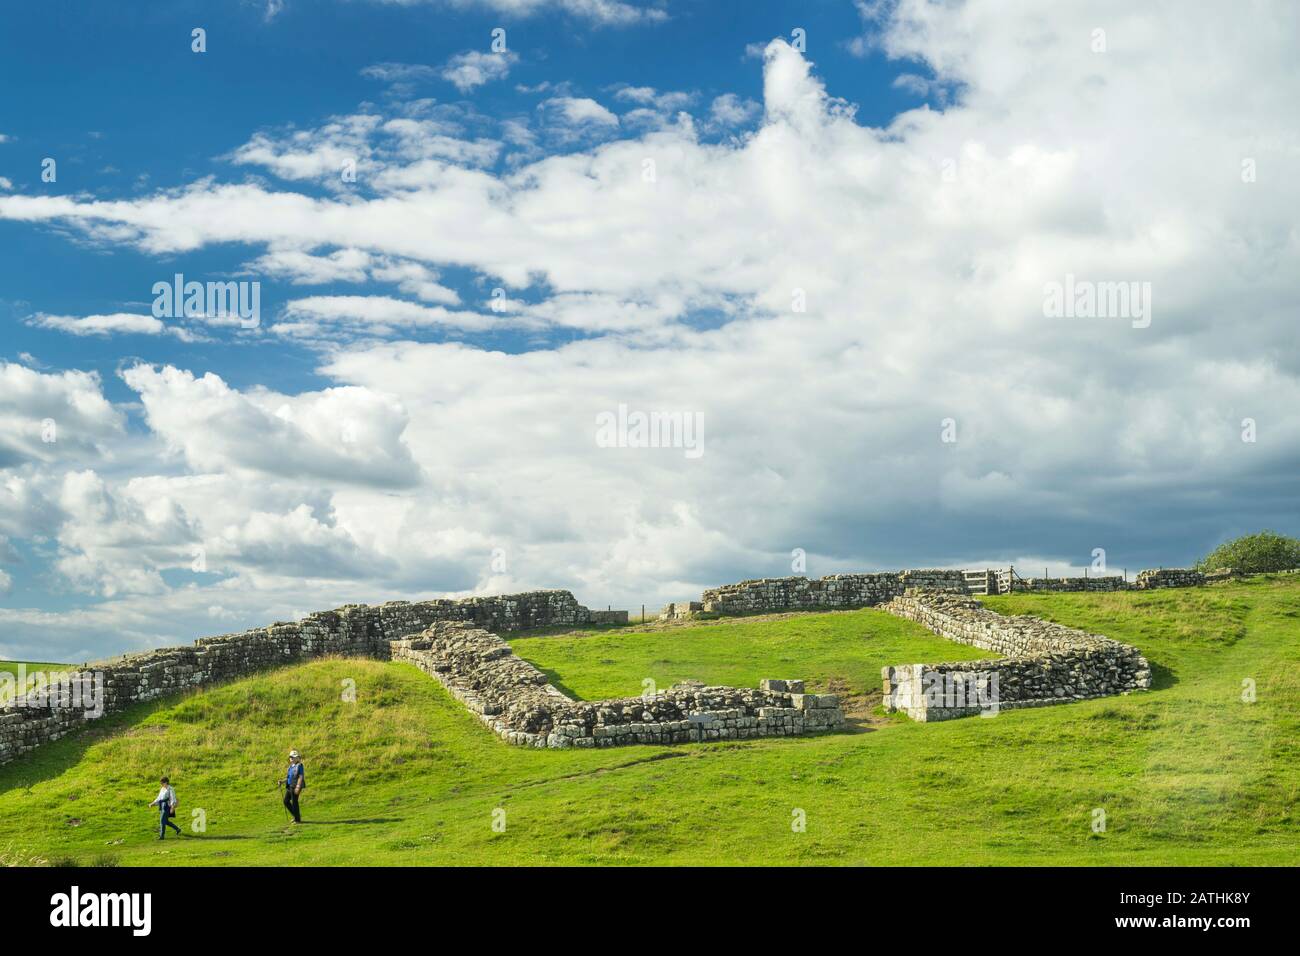 People walking in front of Milecastle 42, Hadrian's Wall Country, Northumberland, England Stock Photo